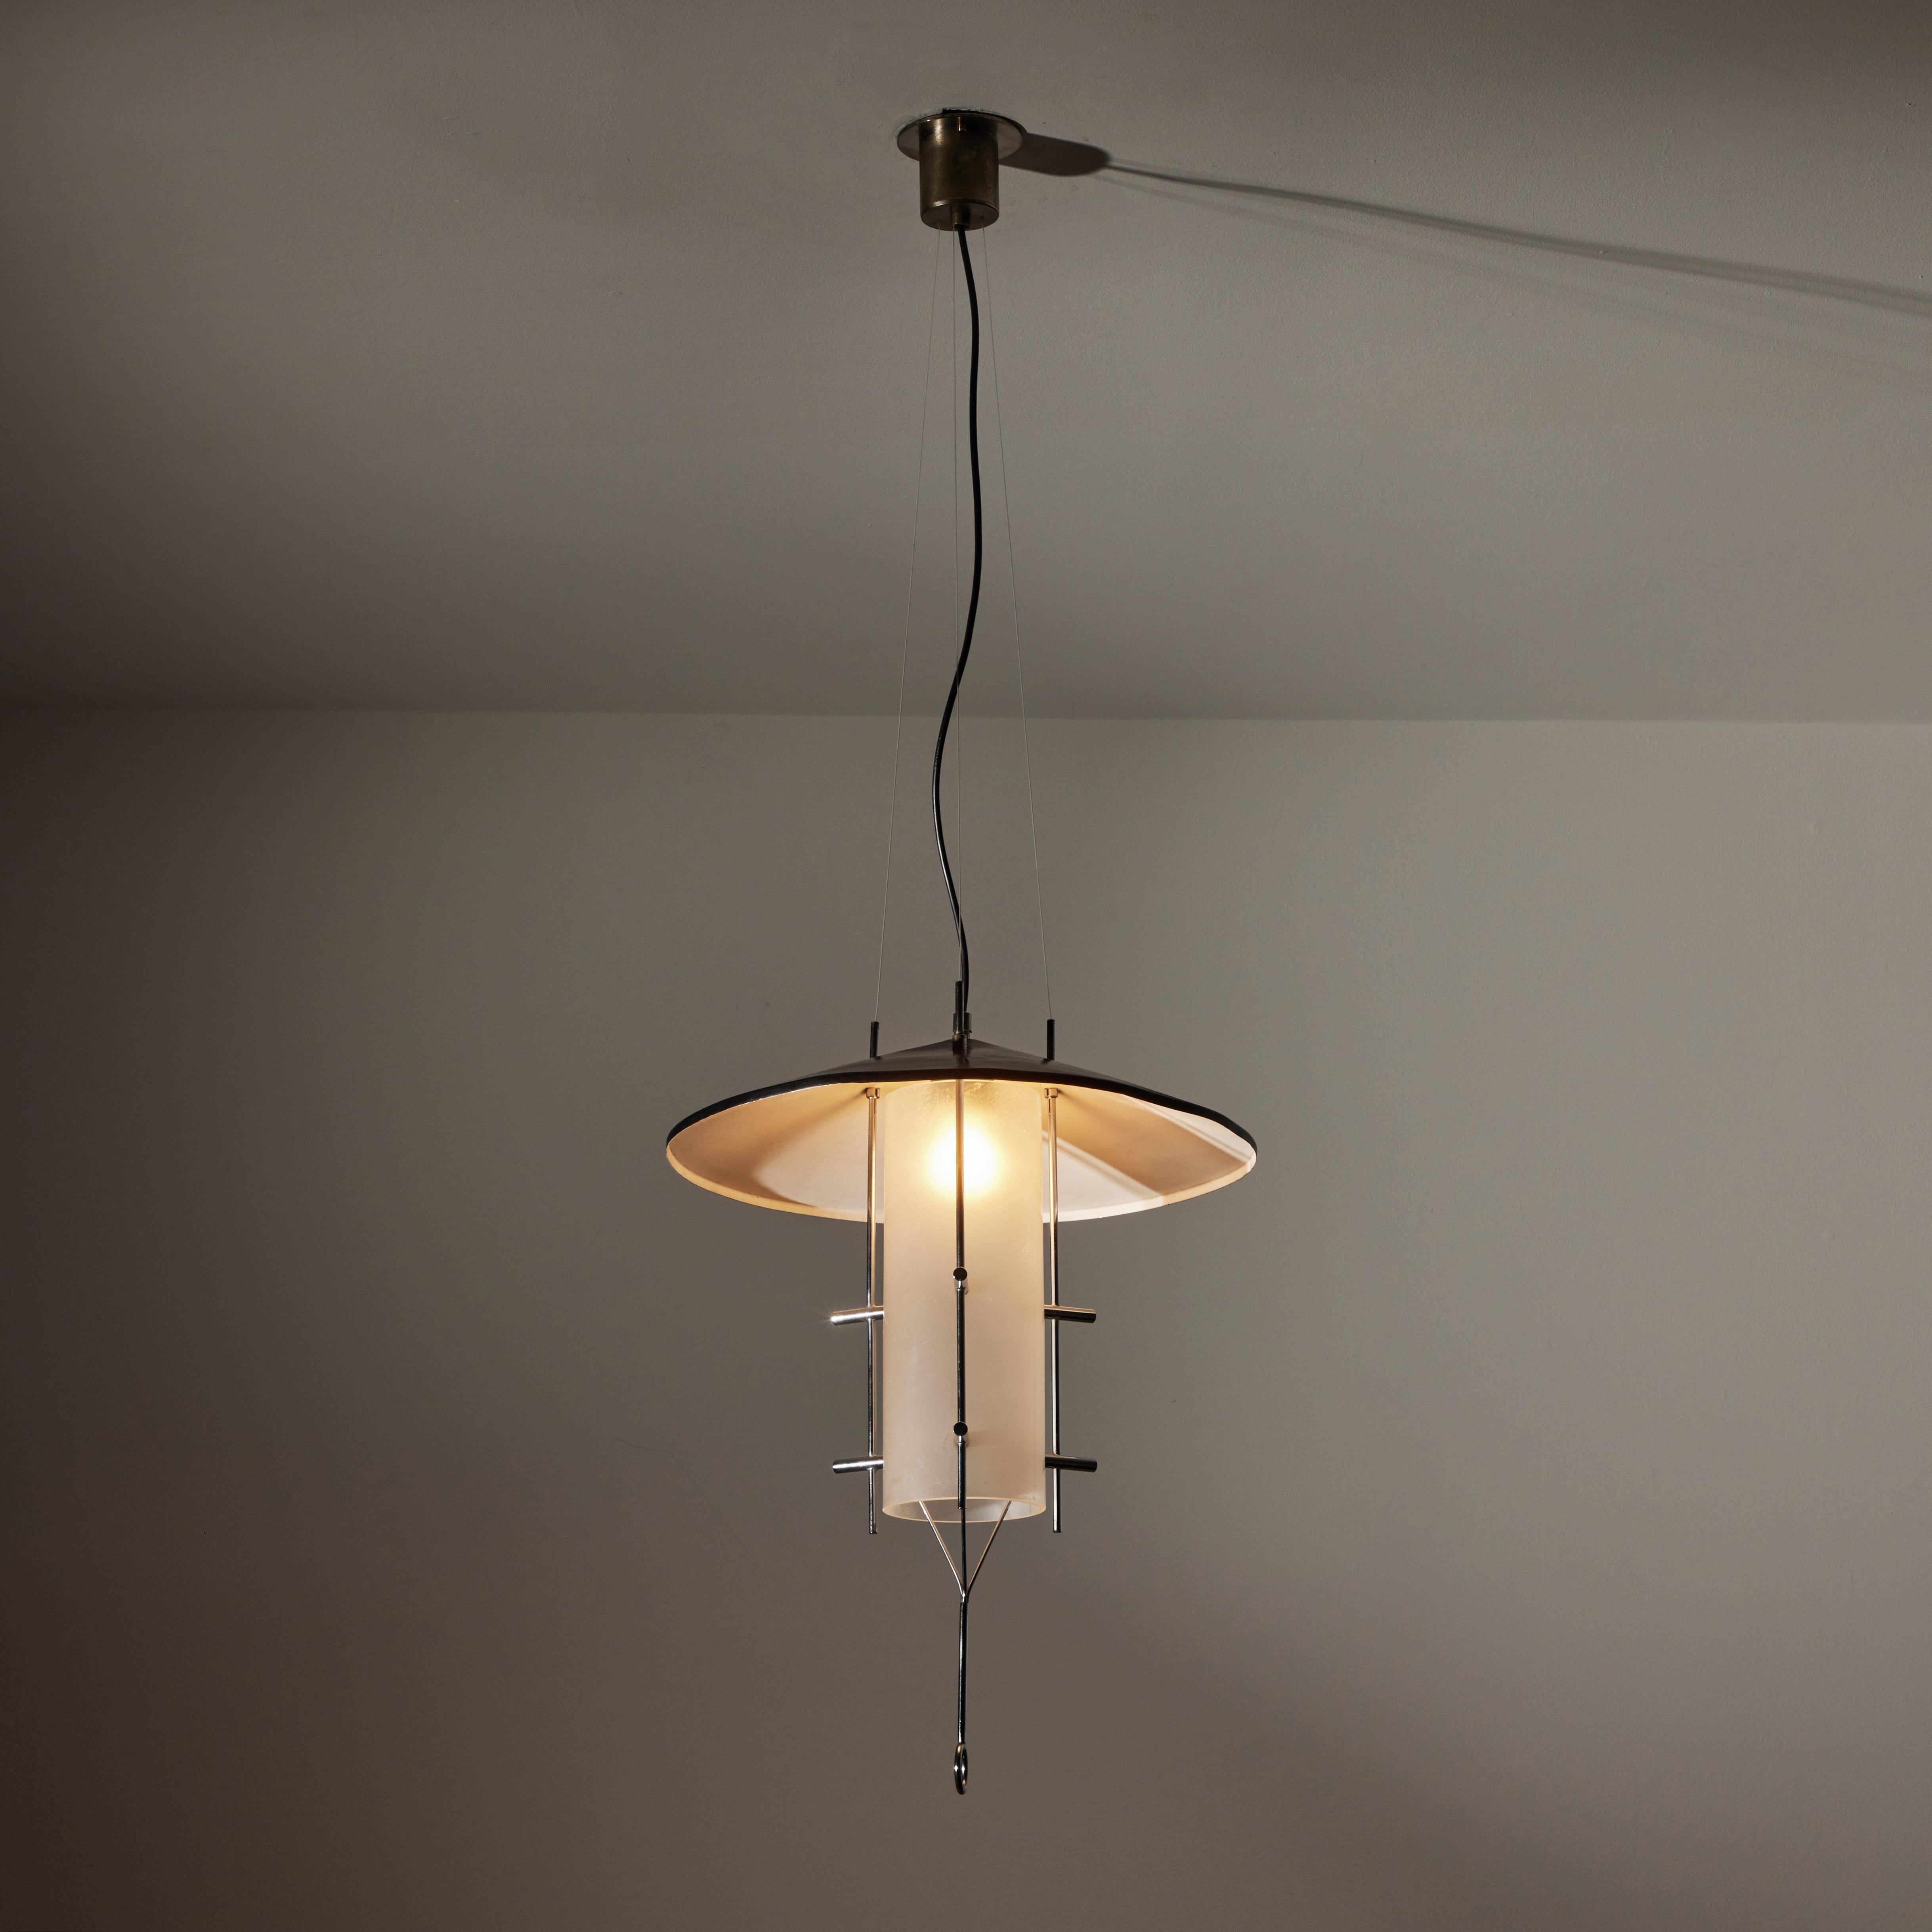 Suspension Light by Stilnovo. Manufactured in Italy, circa 1960's. Painted metal, acrylic. Lacquered metal and nickel-plated brass. Opal glass diffuser. Rewired for U.S. standards. We recommend one E27 100w maximum bulb. Bulbs not included.